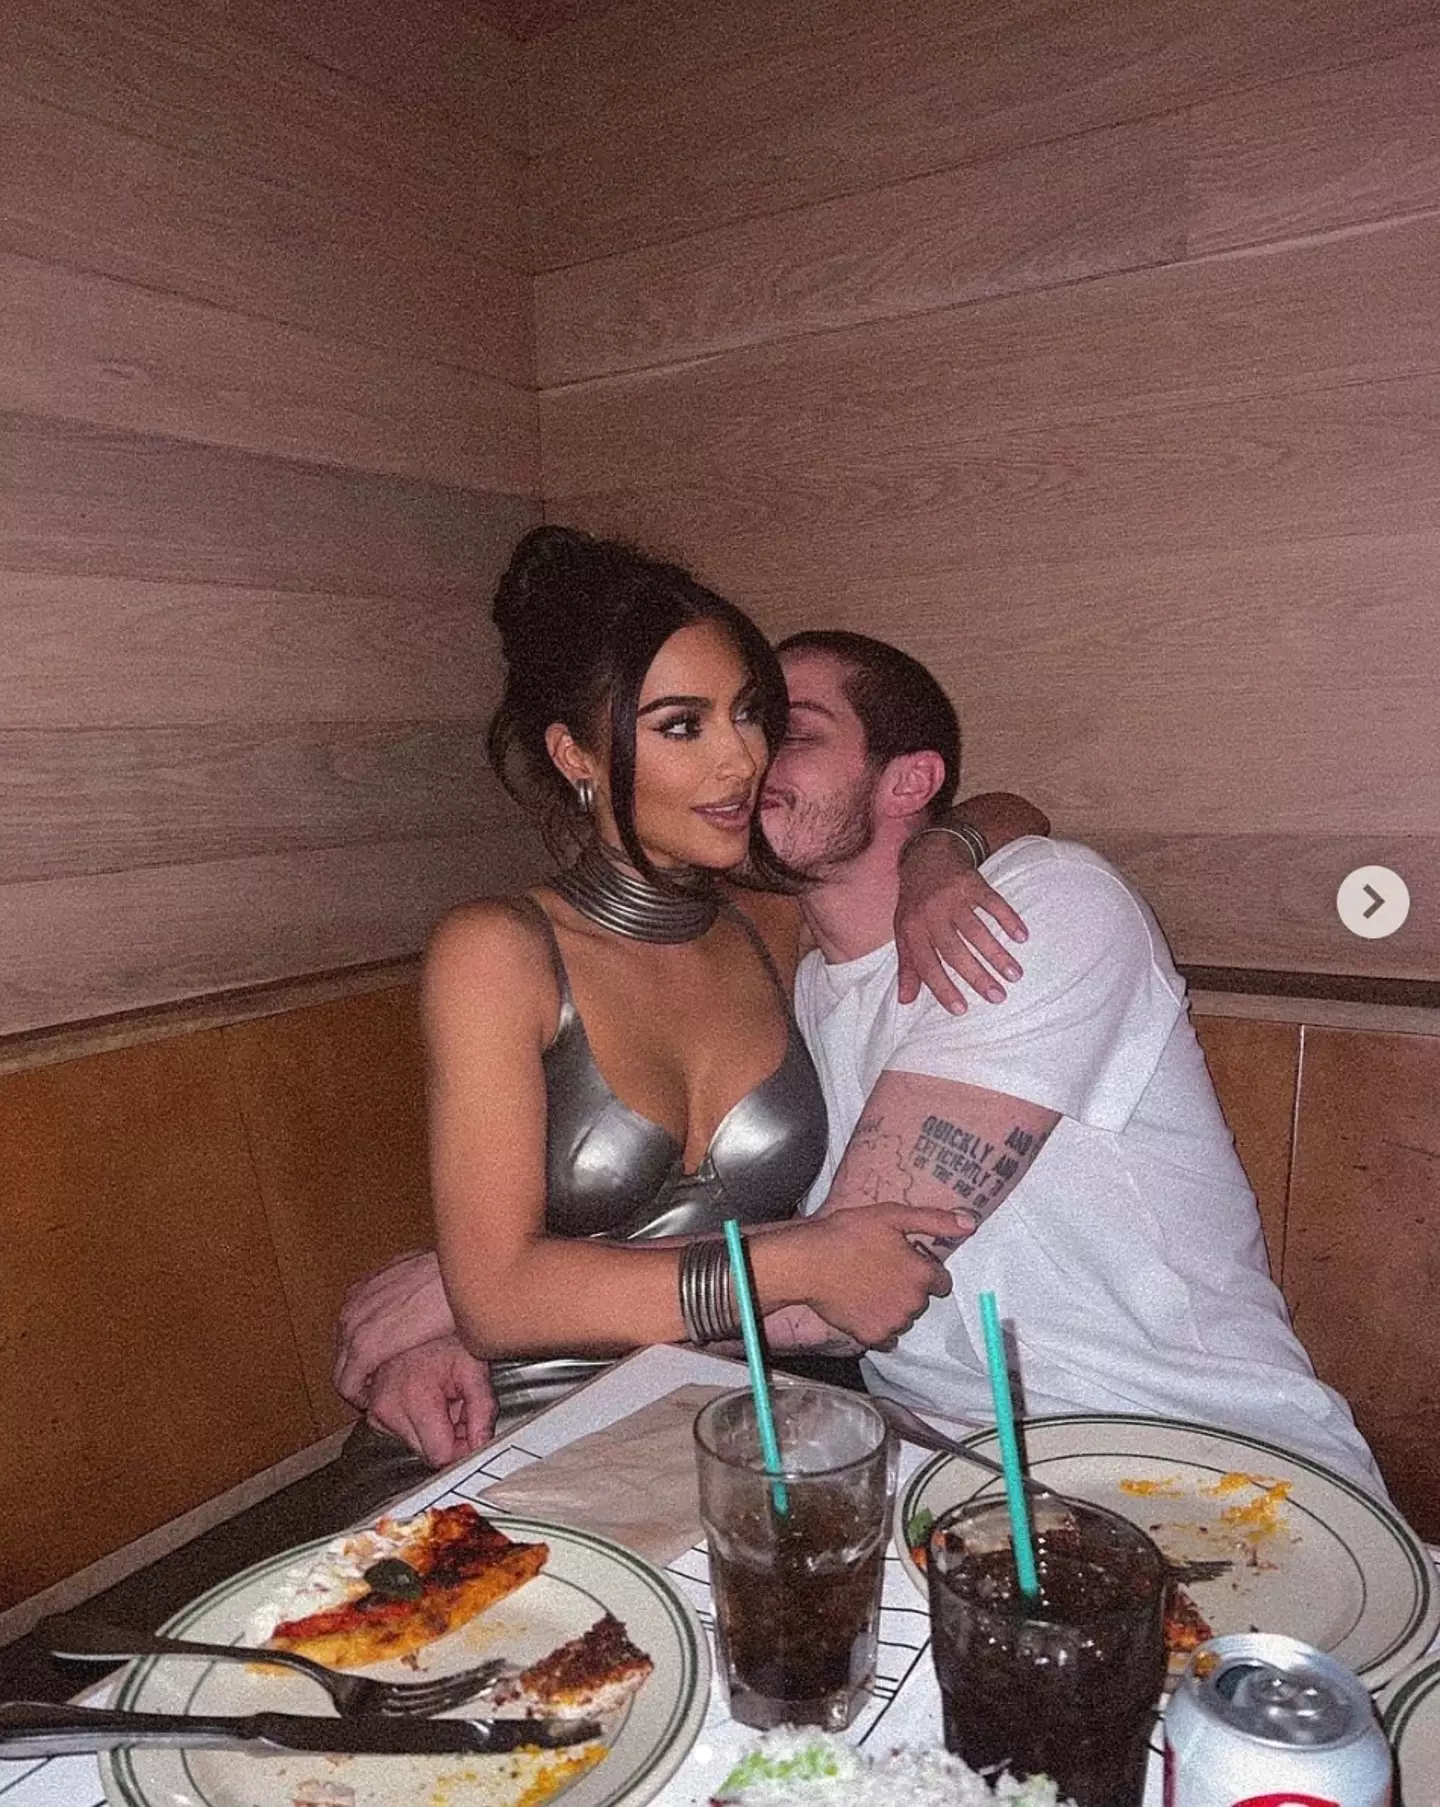 Fans are losing it over a recent photo Kim Kardashian shared with Pete Davidson - because of their dinner order (Instagram @kimkardashian).